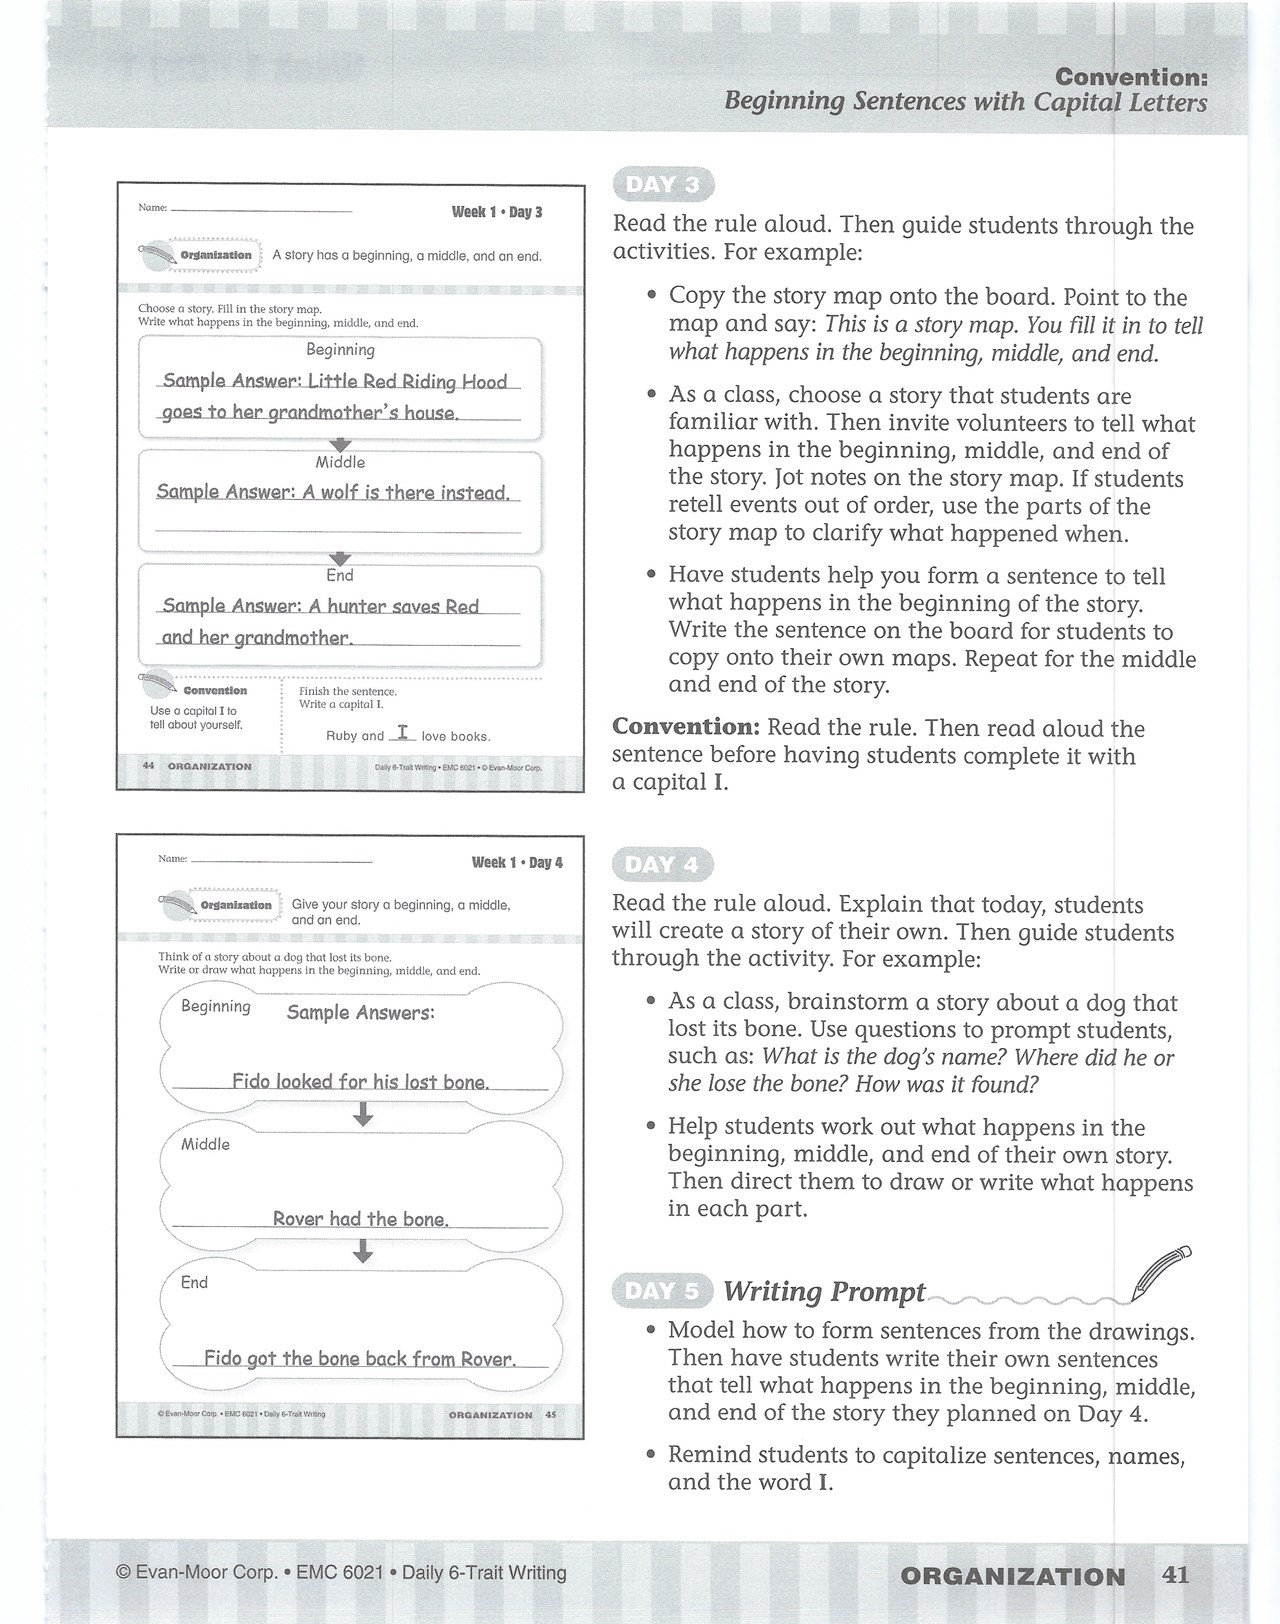 evan-moor-corp-worksheets-answers-free-download-goodimg-co